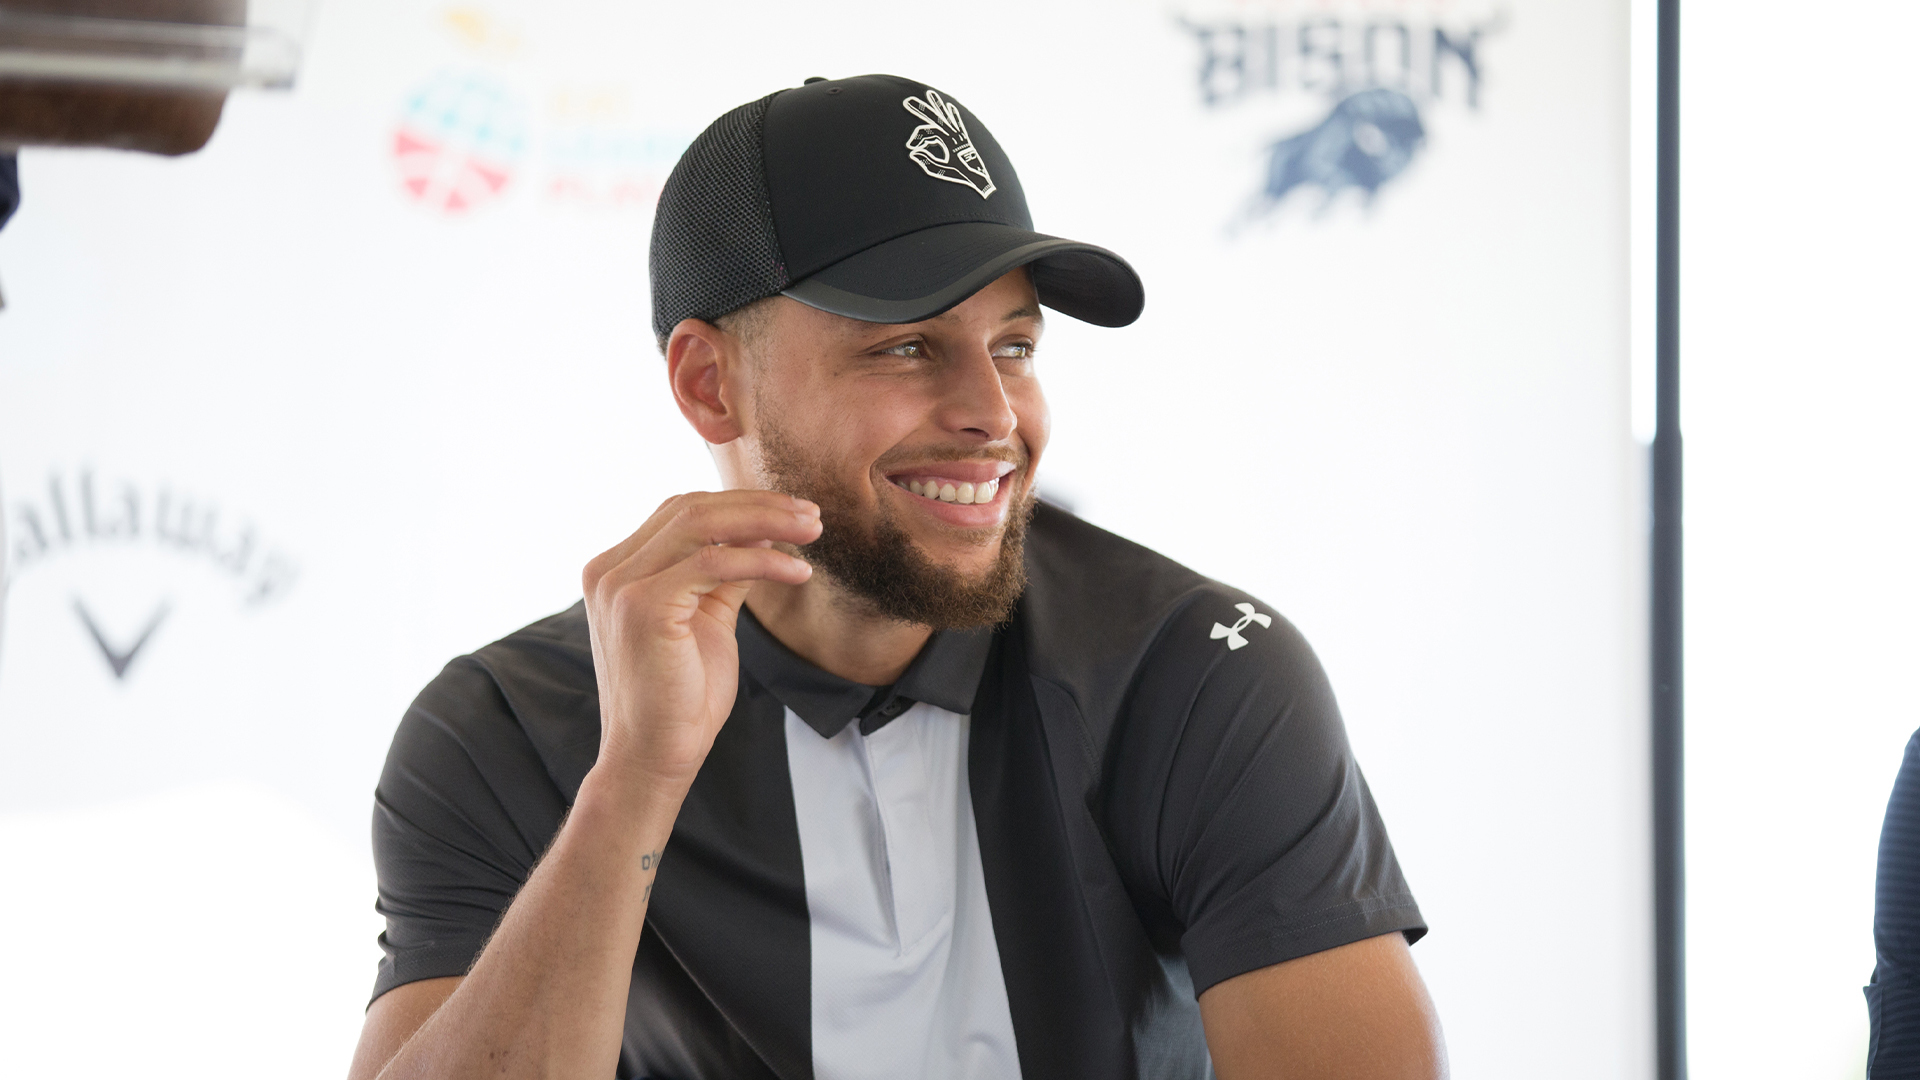 NBA's Steph Curry Sets Out To Close The Racial Wealth Gap With Nonprofit NinetyToZero